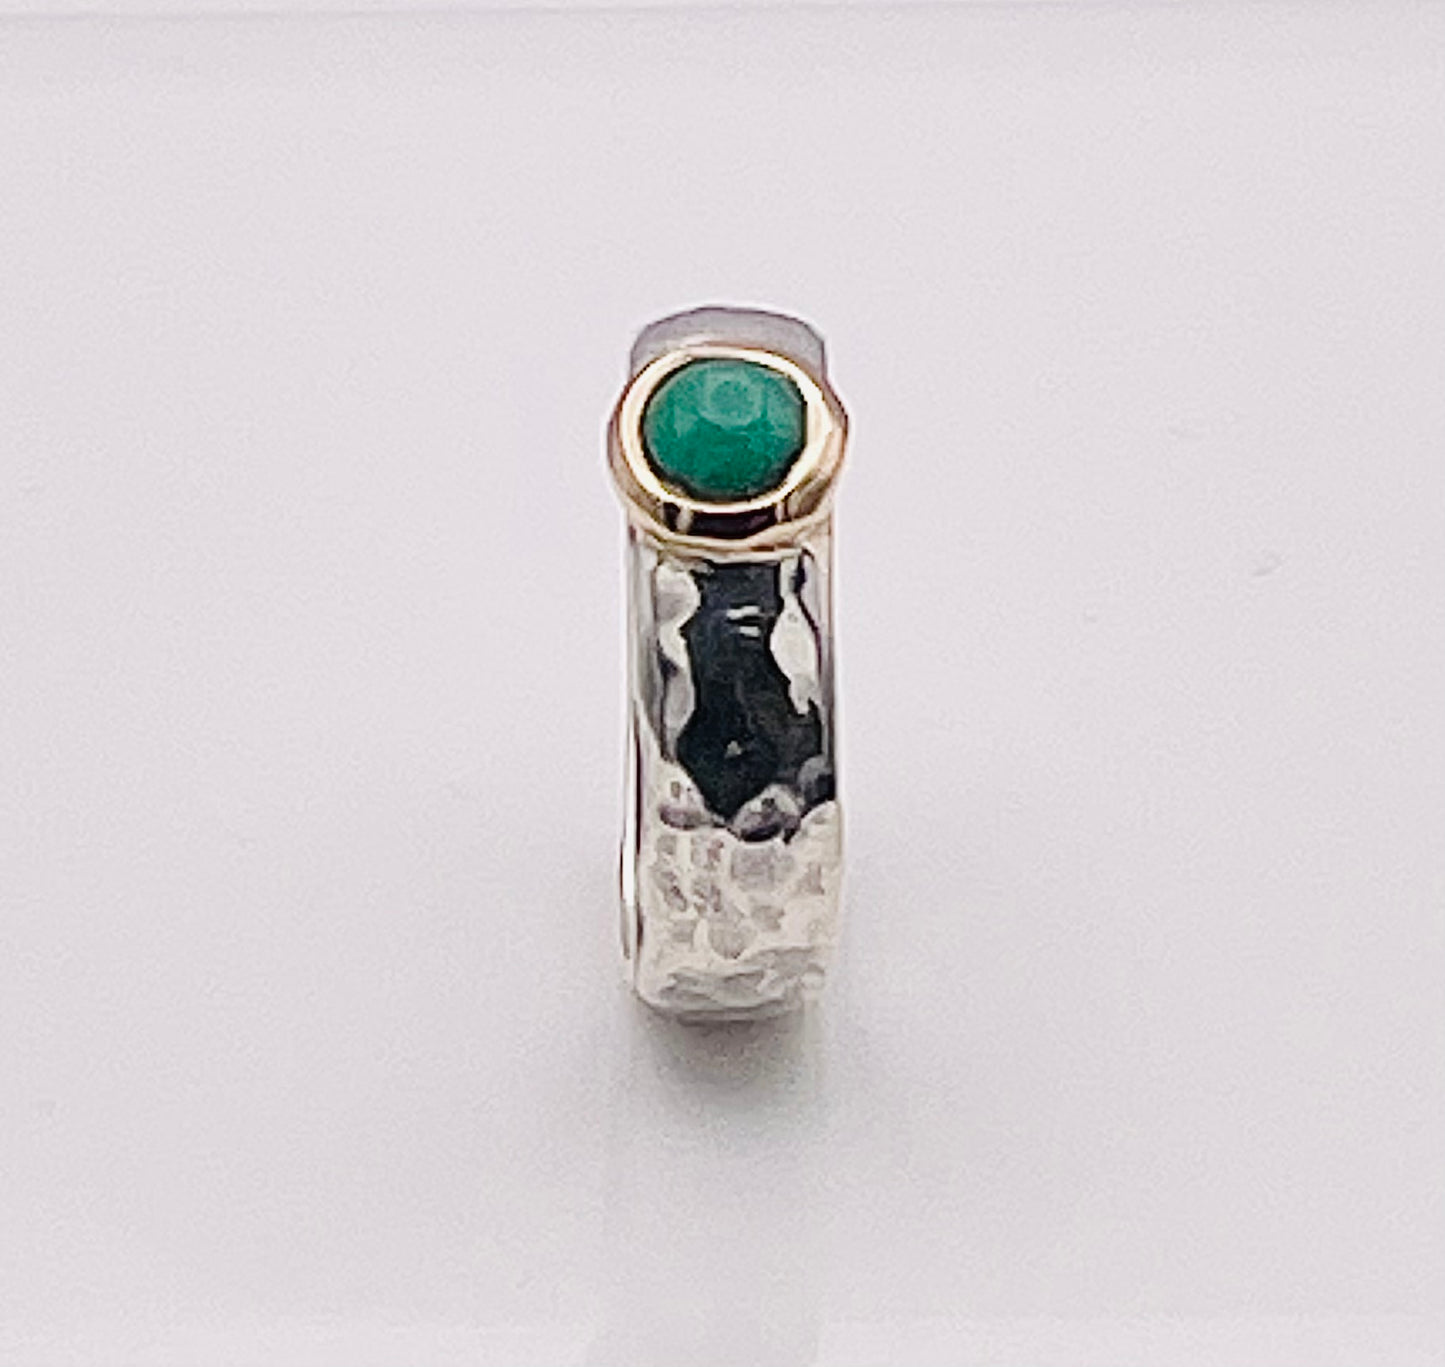 Cabochon Emerald , gold and silver ring